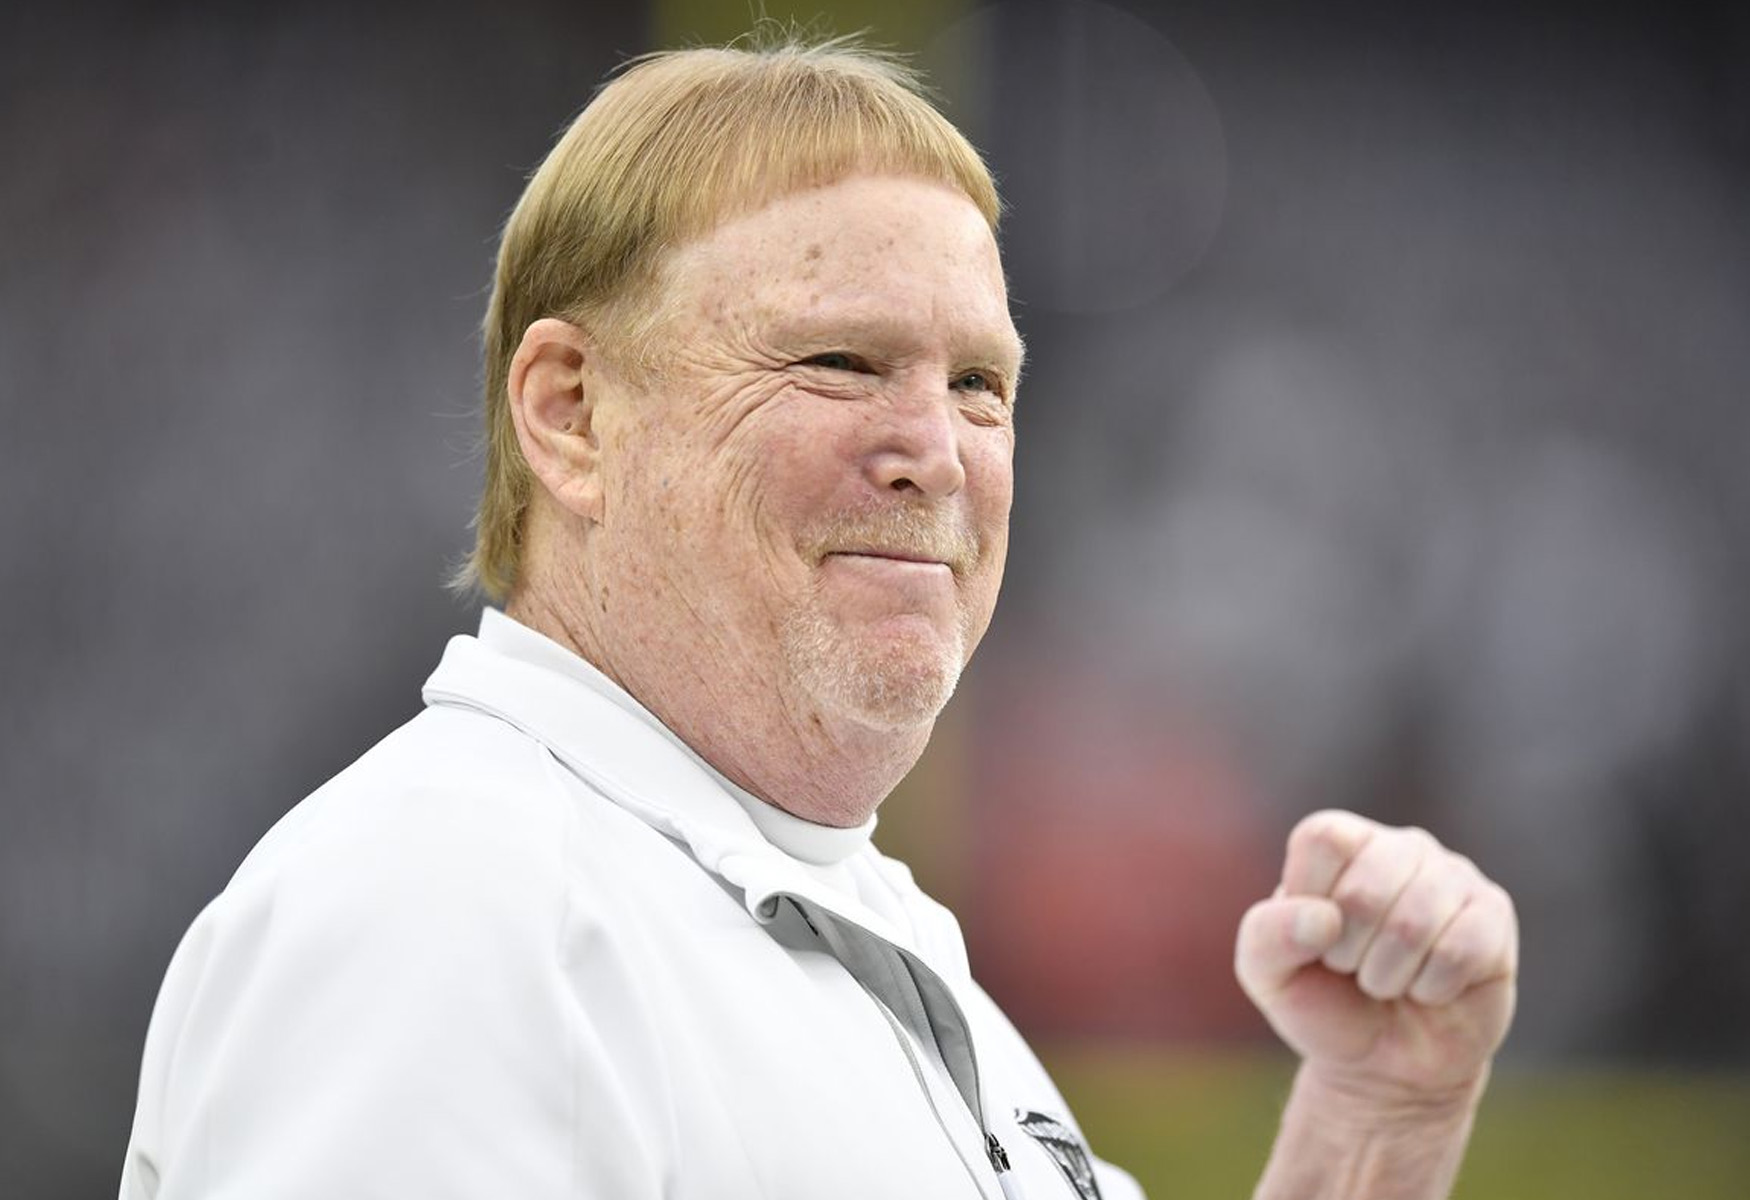 mark-davis-epic-hydration-habits-steal-the-show-during-raiders-dominant-victory